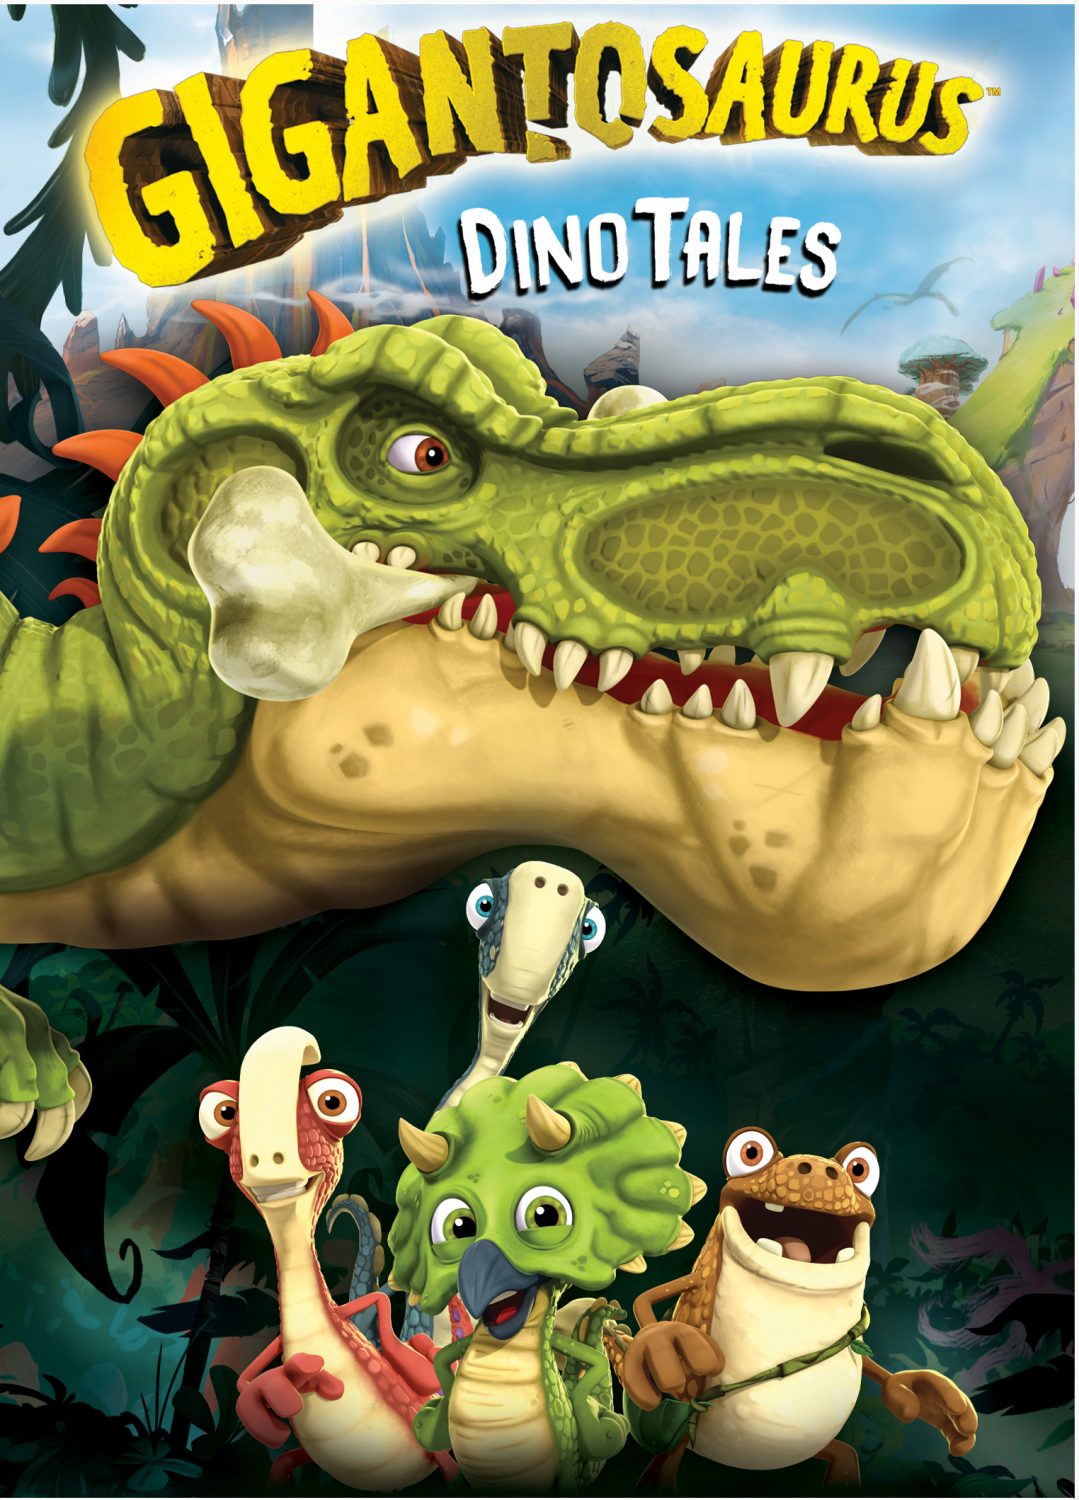 Gigantosaurus Preschool Series Picked Up for Second and Third